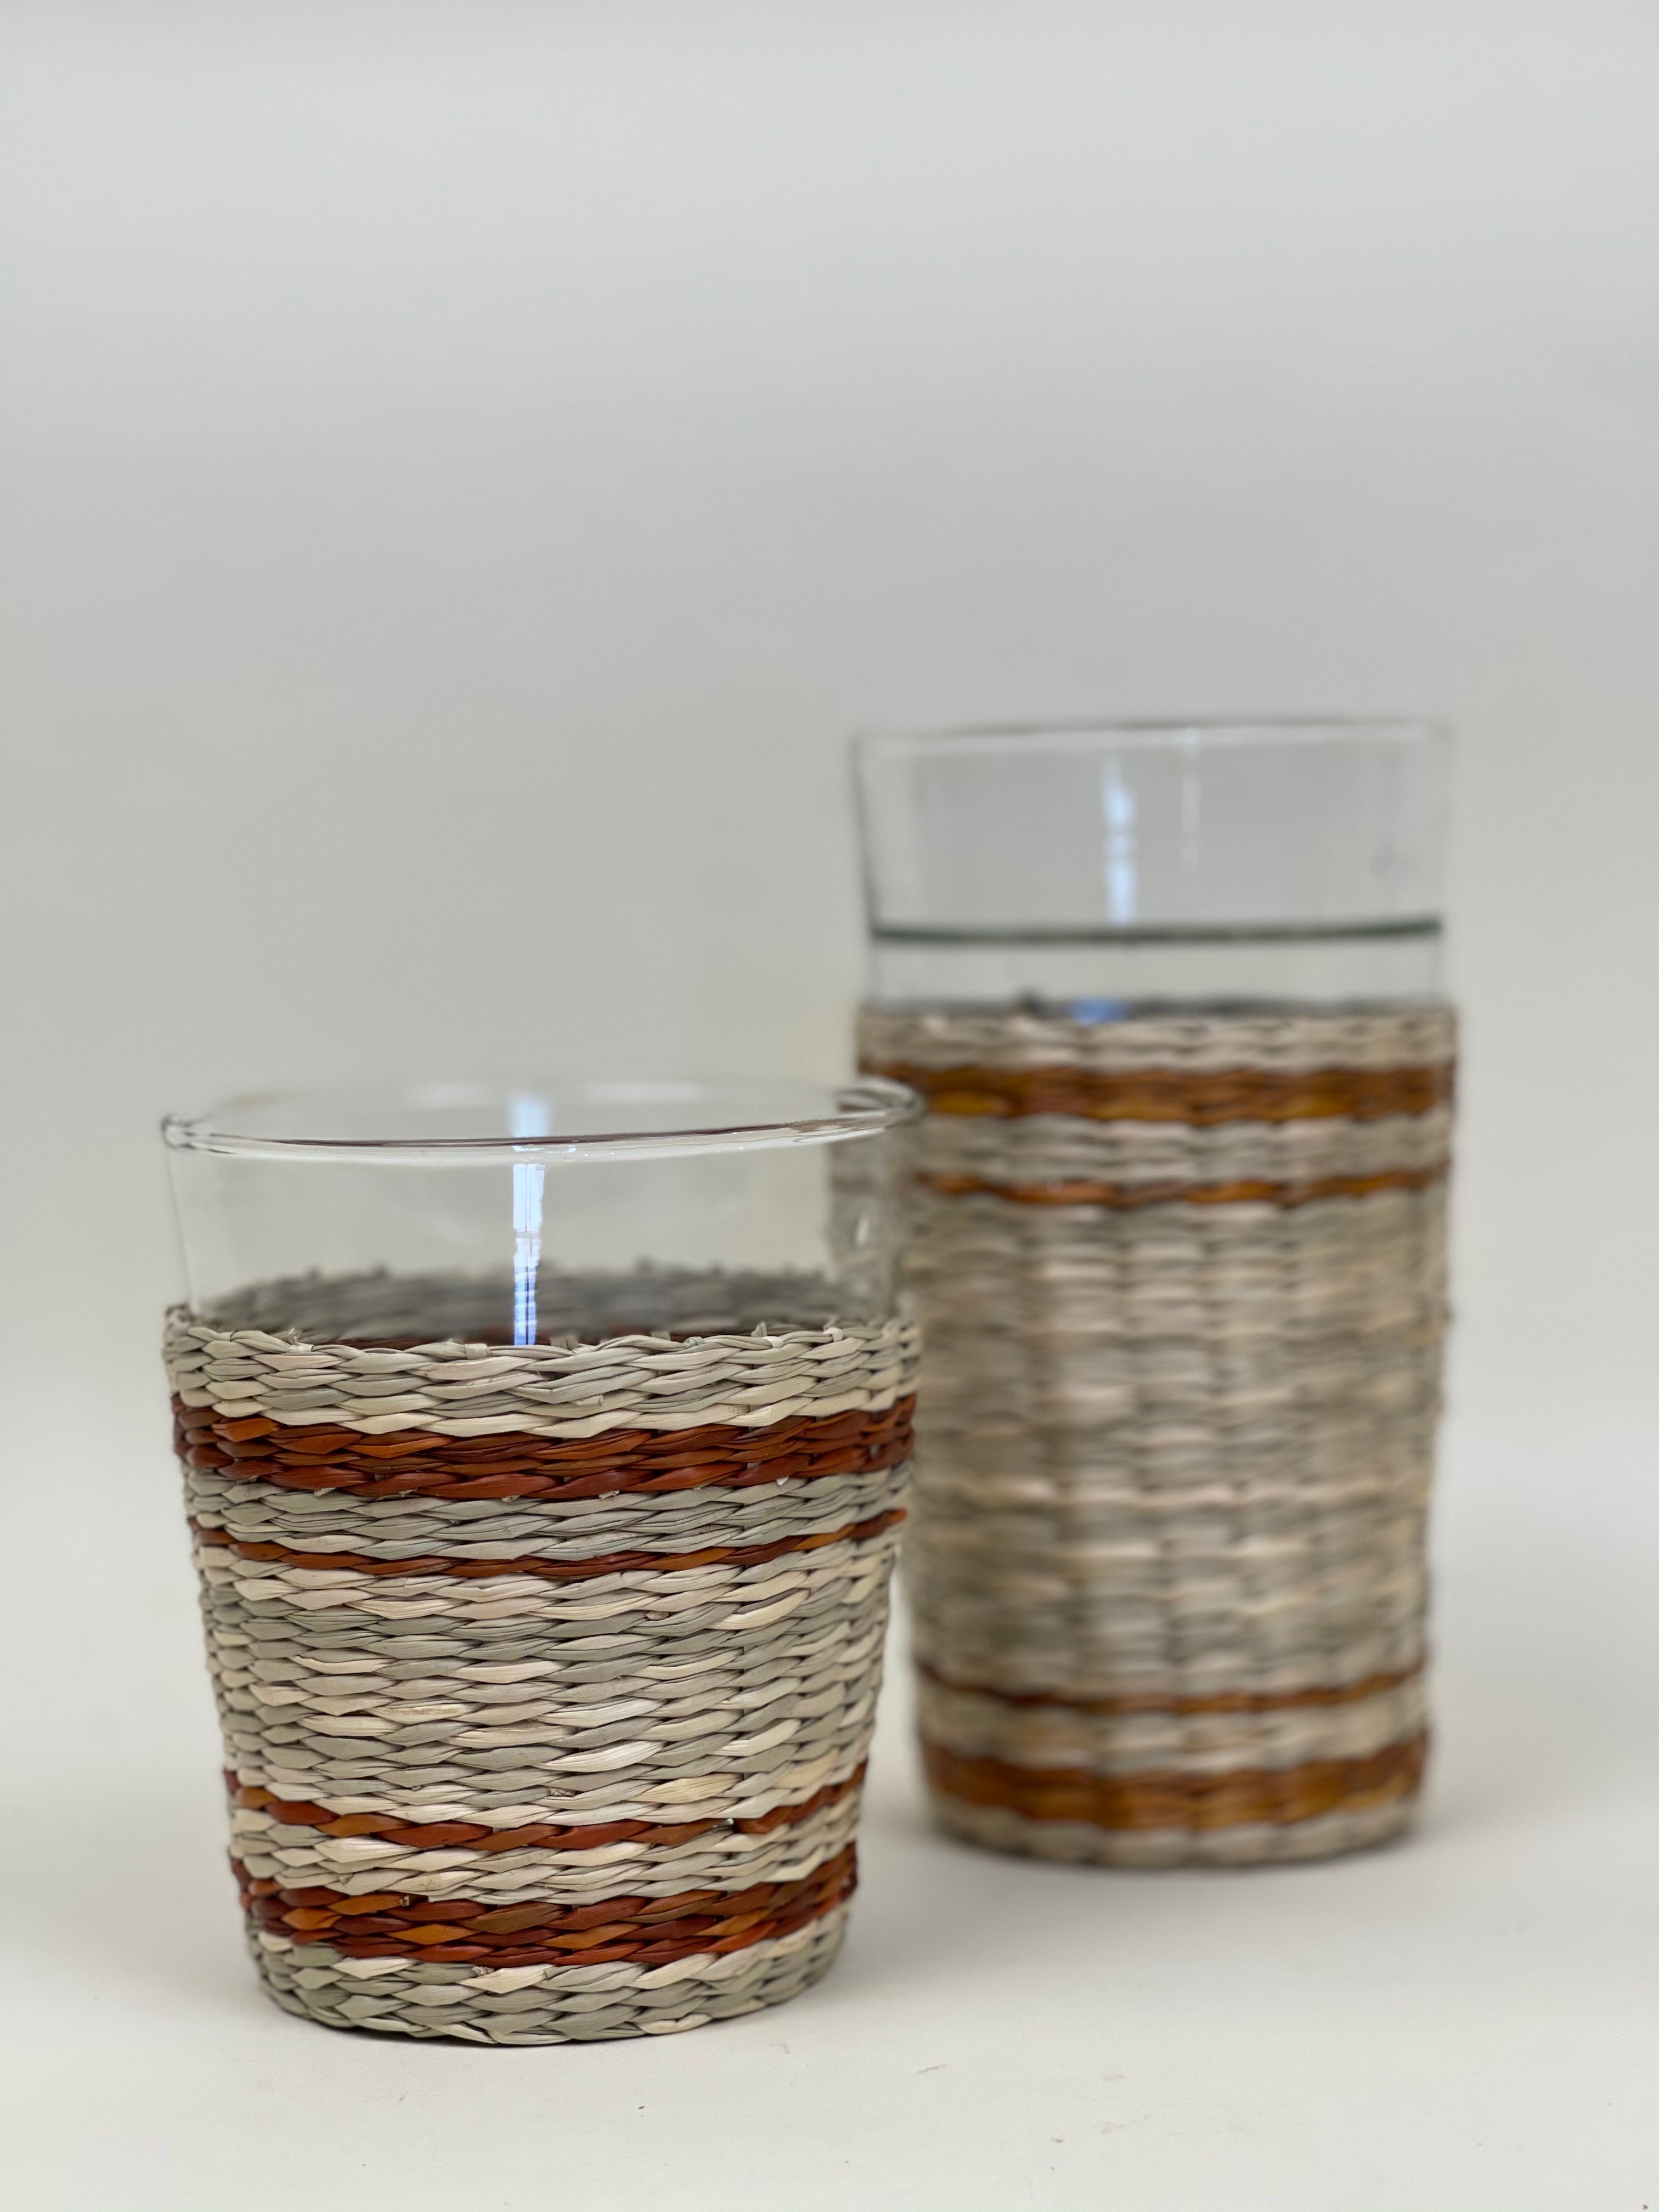 Brown Striped Seagrass Wide Tumbler (Now 25% off!) Glass Seagrass Brand_Seagrass & Rattan Kitchen_Drinkware lm New Arrivals Seagrass Summer Clean Up summer sale Tumblers & Highballs sepiawidetumblerAmbiance